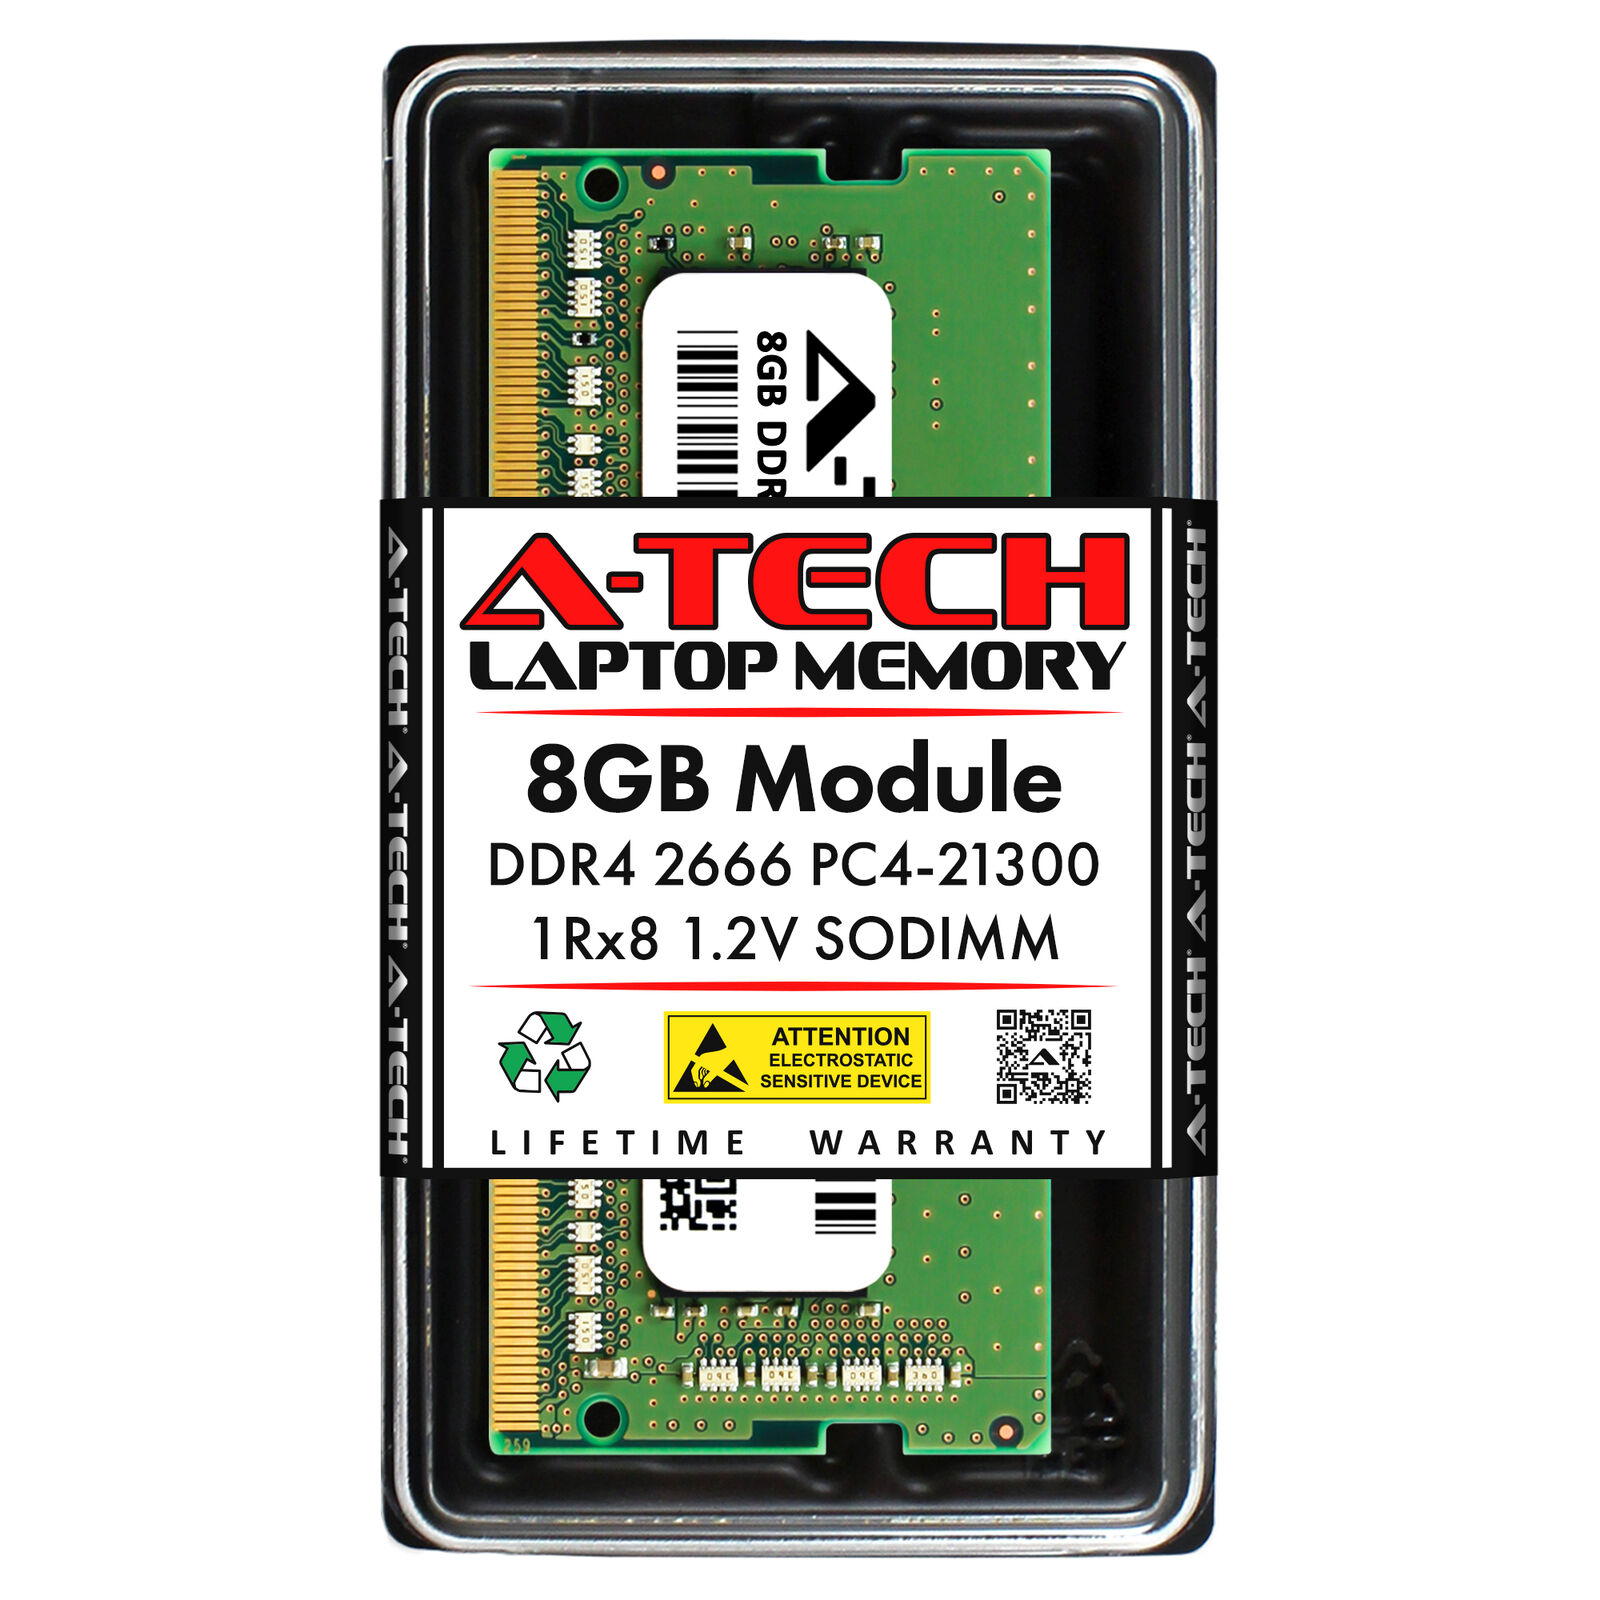 8GB PC4-21300 SODIMM Memory RAM for Dell Inspiron 15 3581 (A9206671 Equivalent)